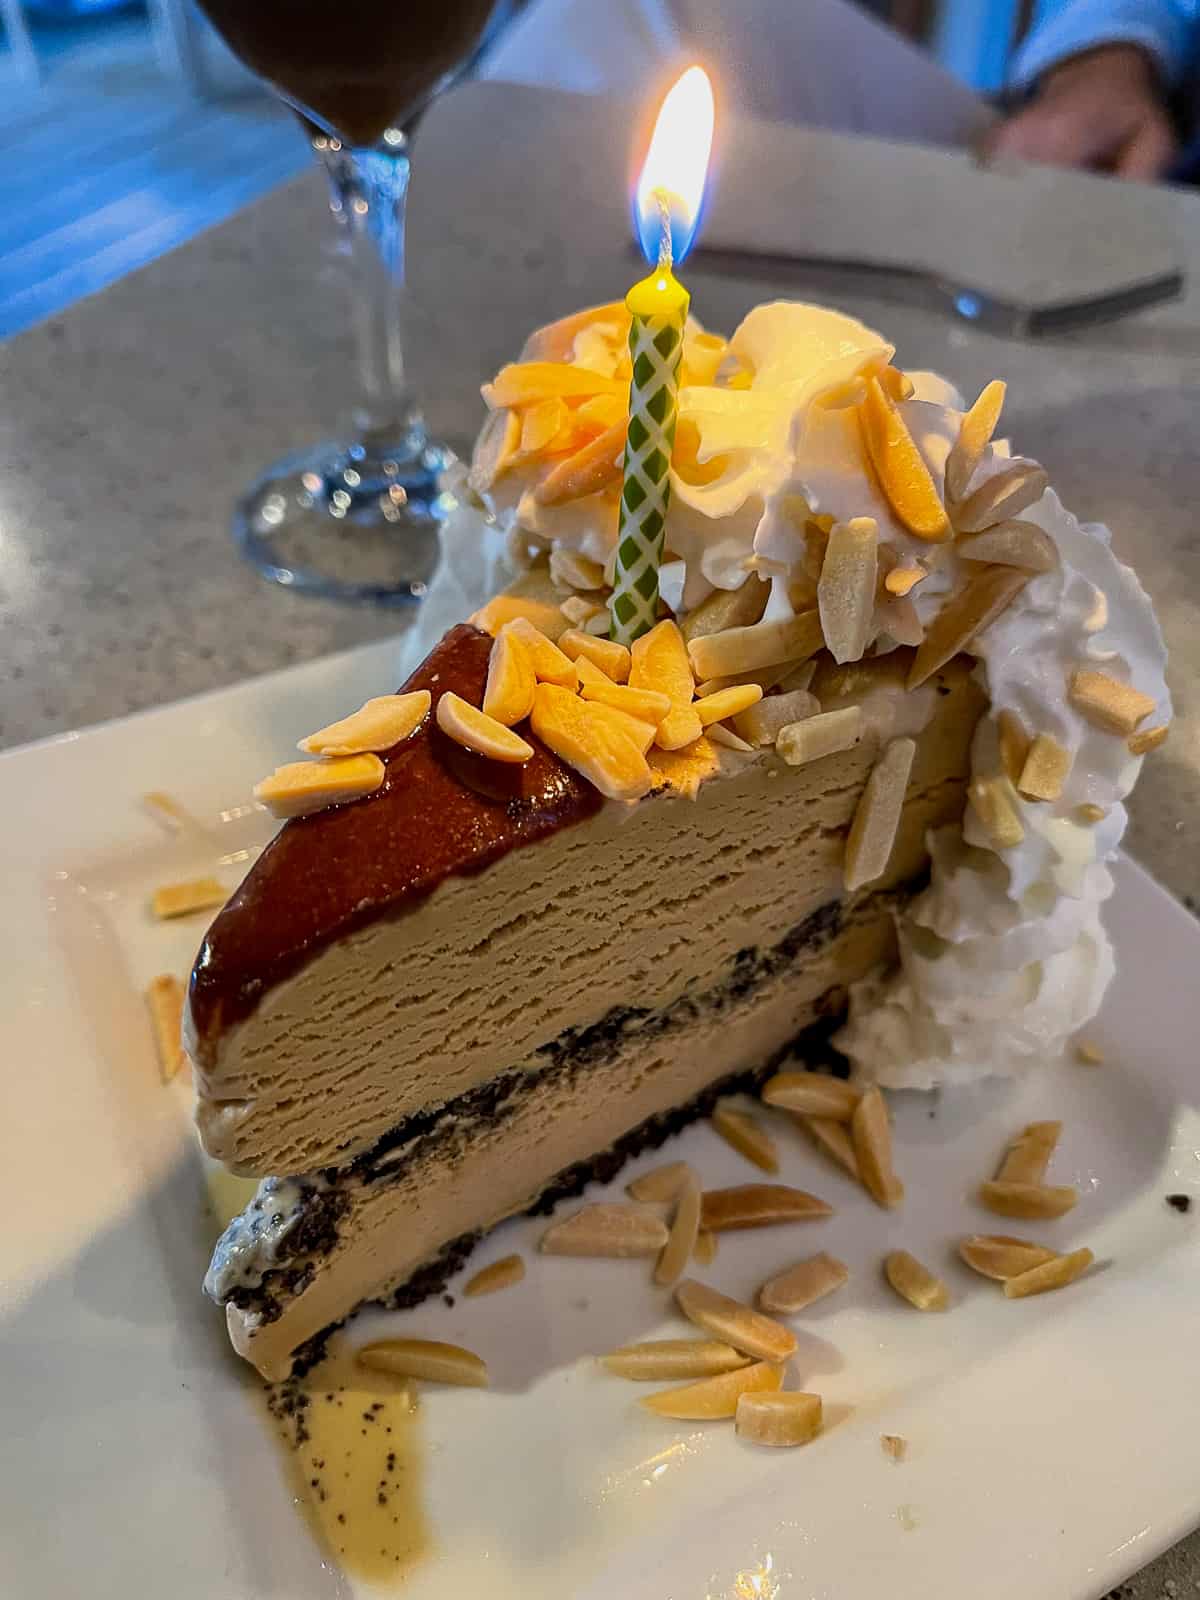 A slice of mud cake with a candle.